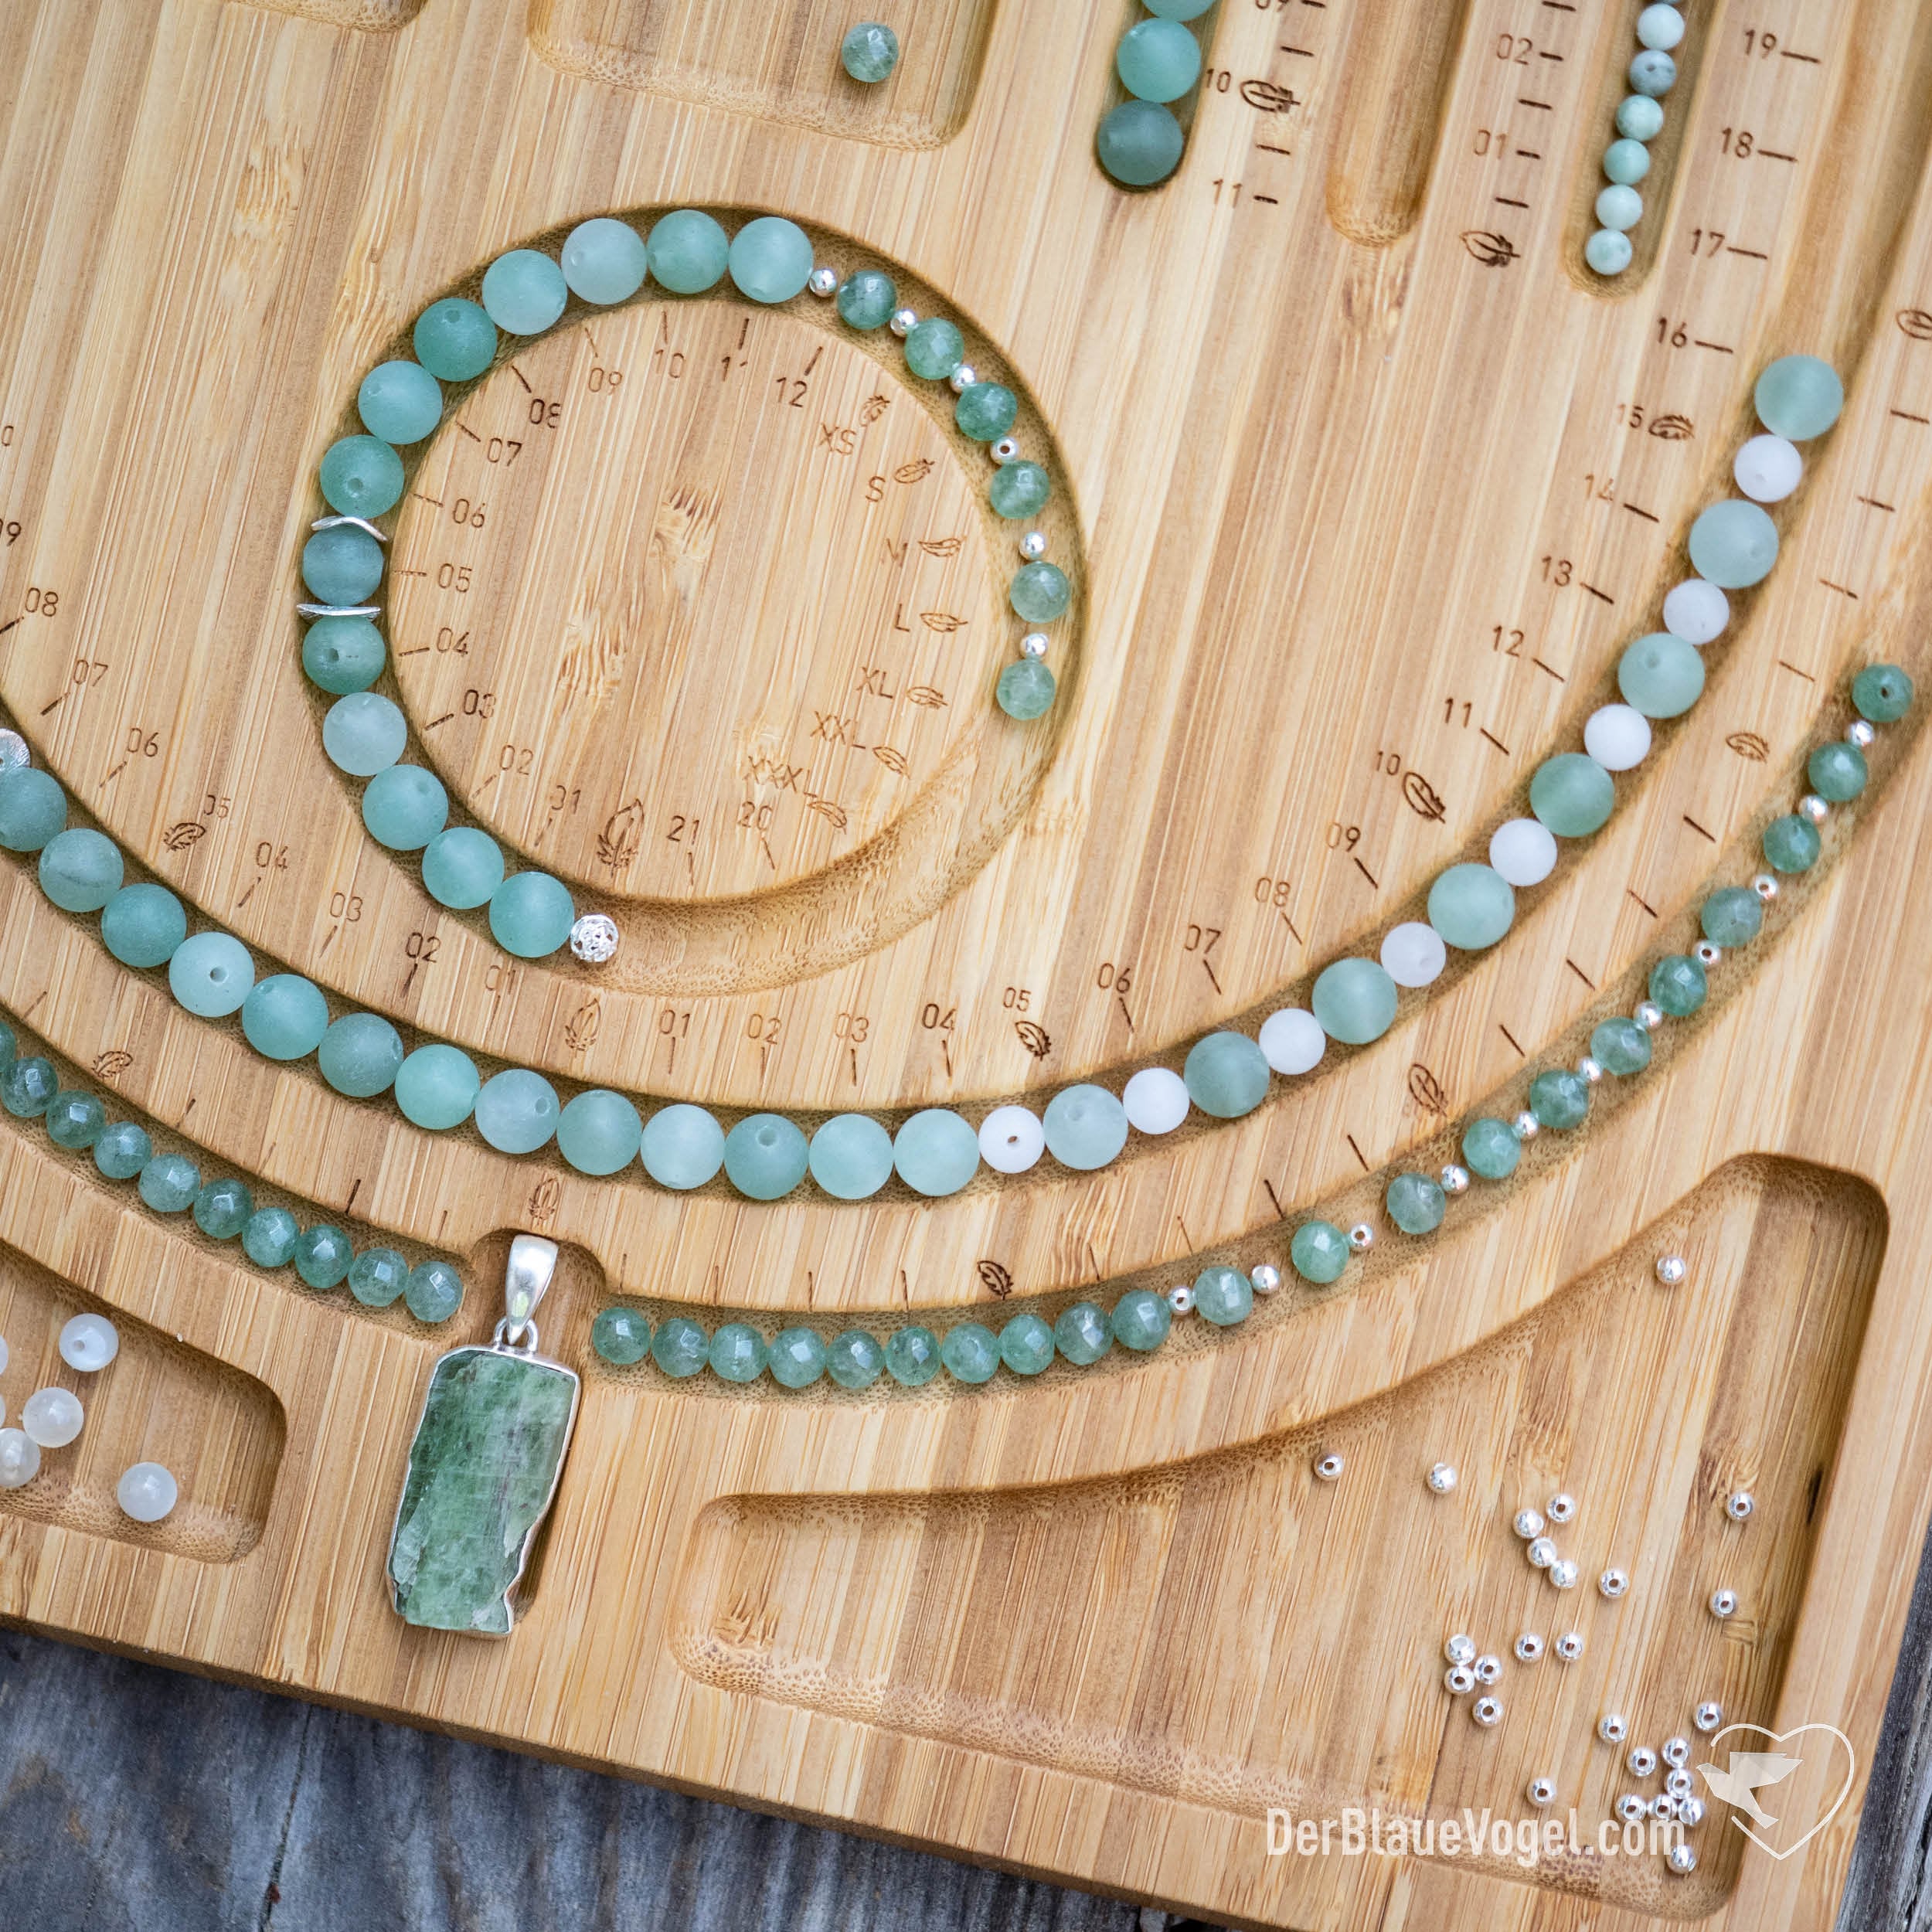 Wooden Malaboard / Beading Board for Necklaces, Yoga Malas Bracelets and  Other Jewelry Design up to 44,5 Inch Length 113 Cm Handmade -  Denmark